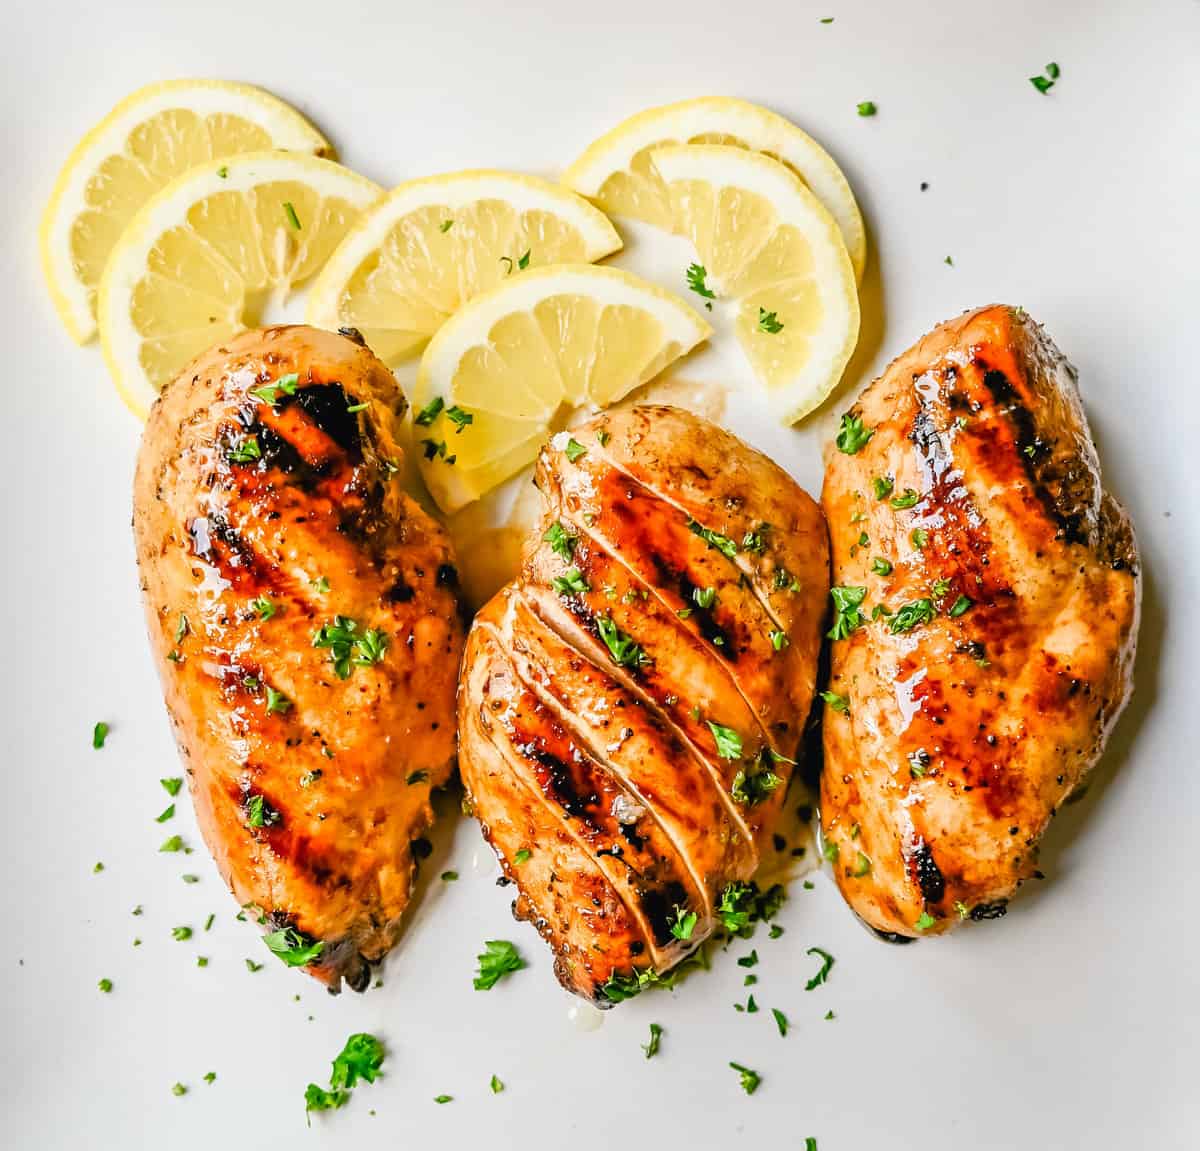 The Best Chicken Marinade Recipe makes chicken extra juicy and flavorful. This savory grilled chicken marinade makes the perfect mouthwatering grilled chicken! Everyone loves this 5-star-rated chicken marinade.